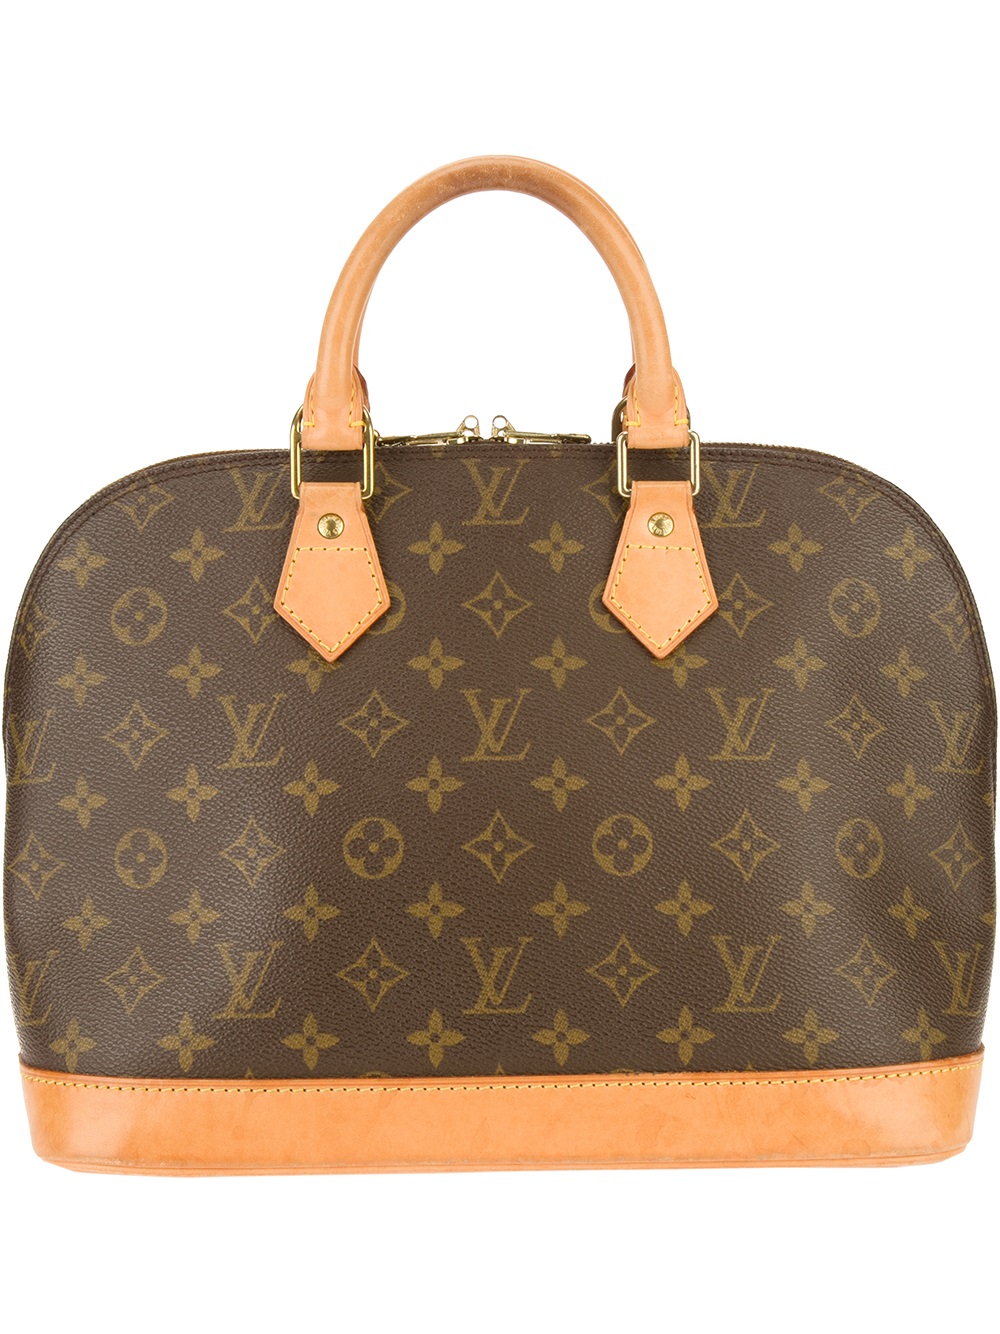 Lv Purse Near Retail Store Dayton Area | Confederated Tribes of the Umatilla Indian Reservation